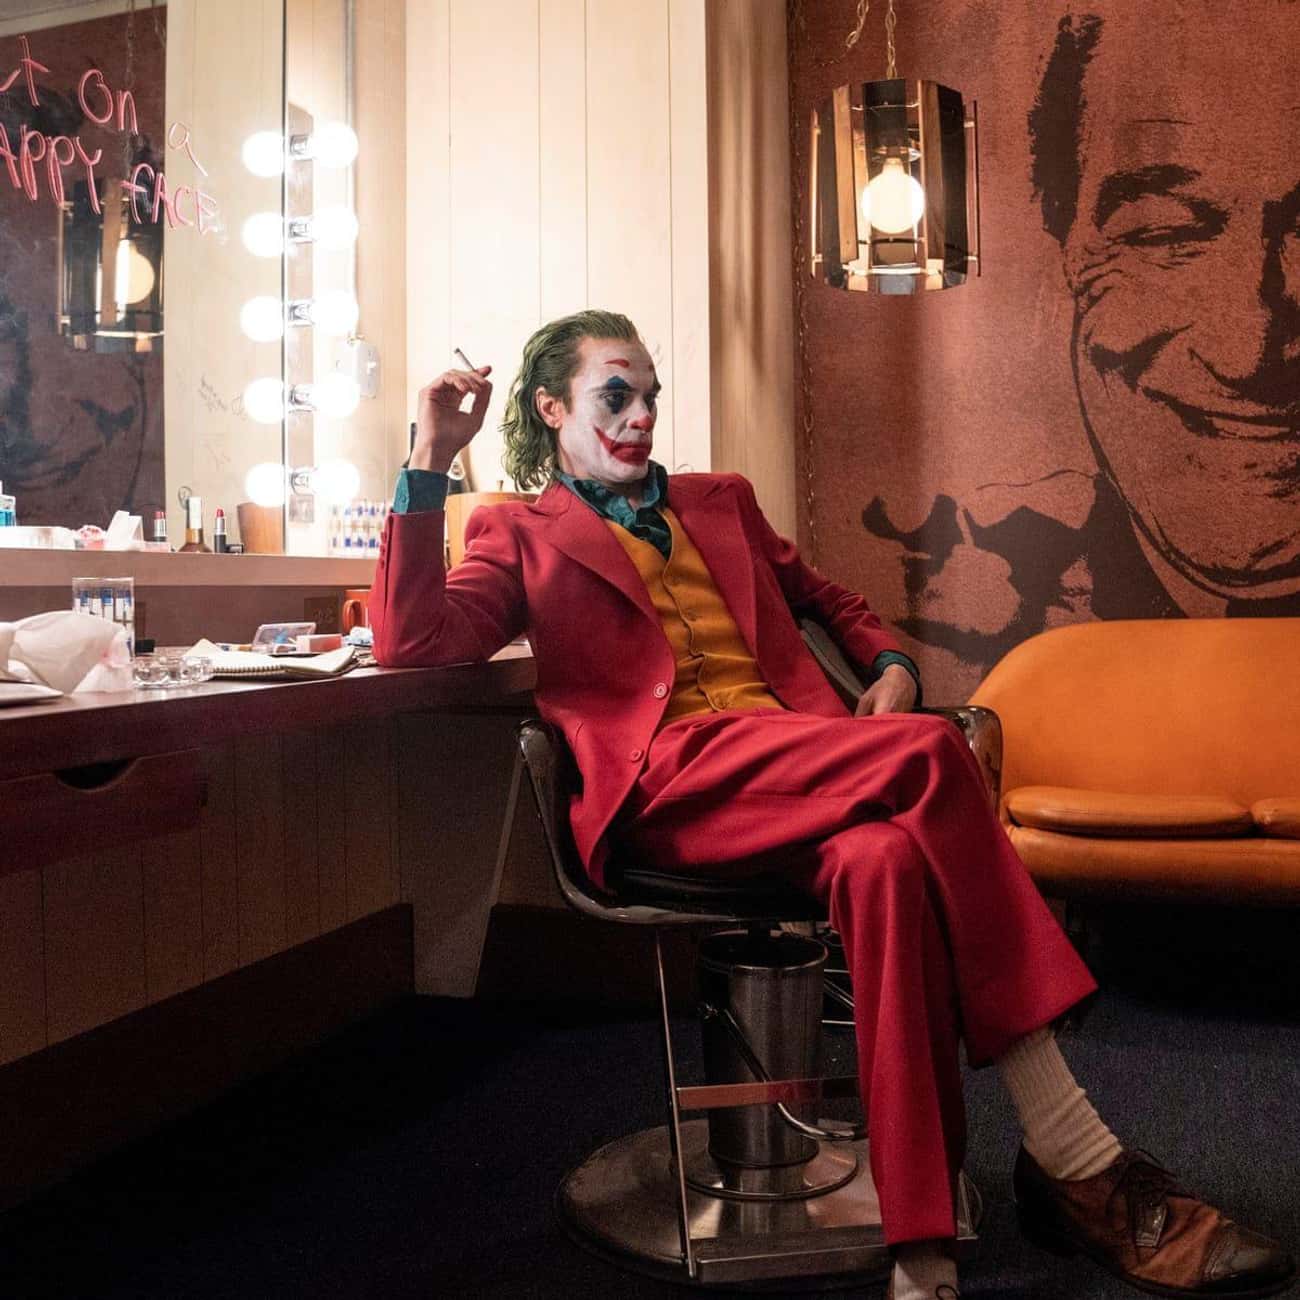 Joaquin Phoenix Never Actually Agreed To Star In 'Joker' - He Just Showed Up To A Wardrobe Fitting One Day